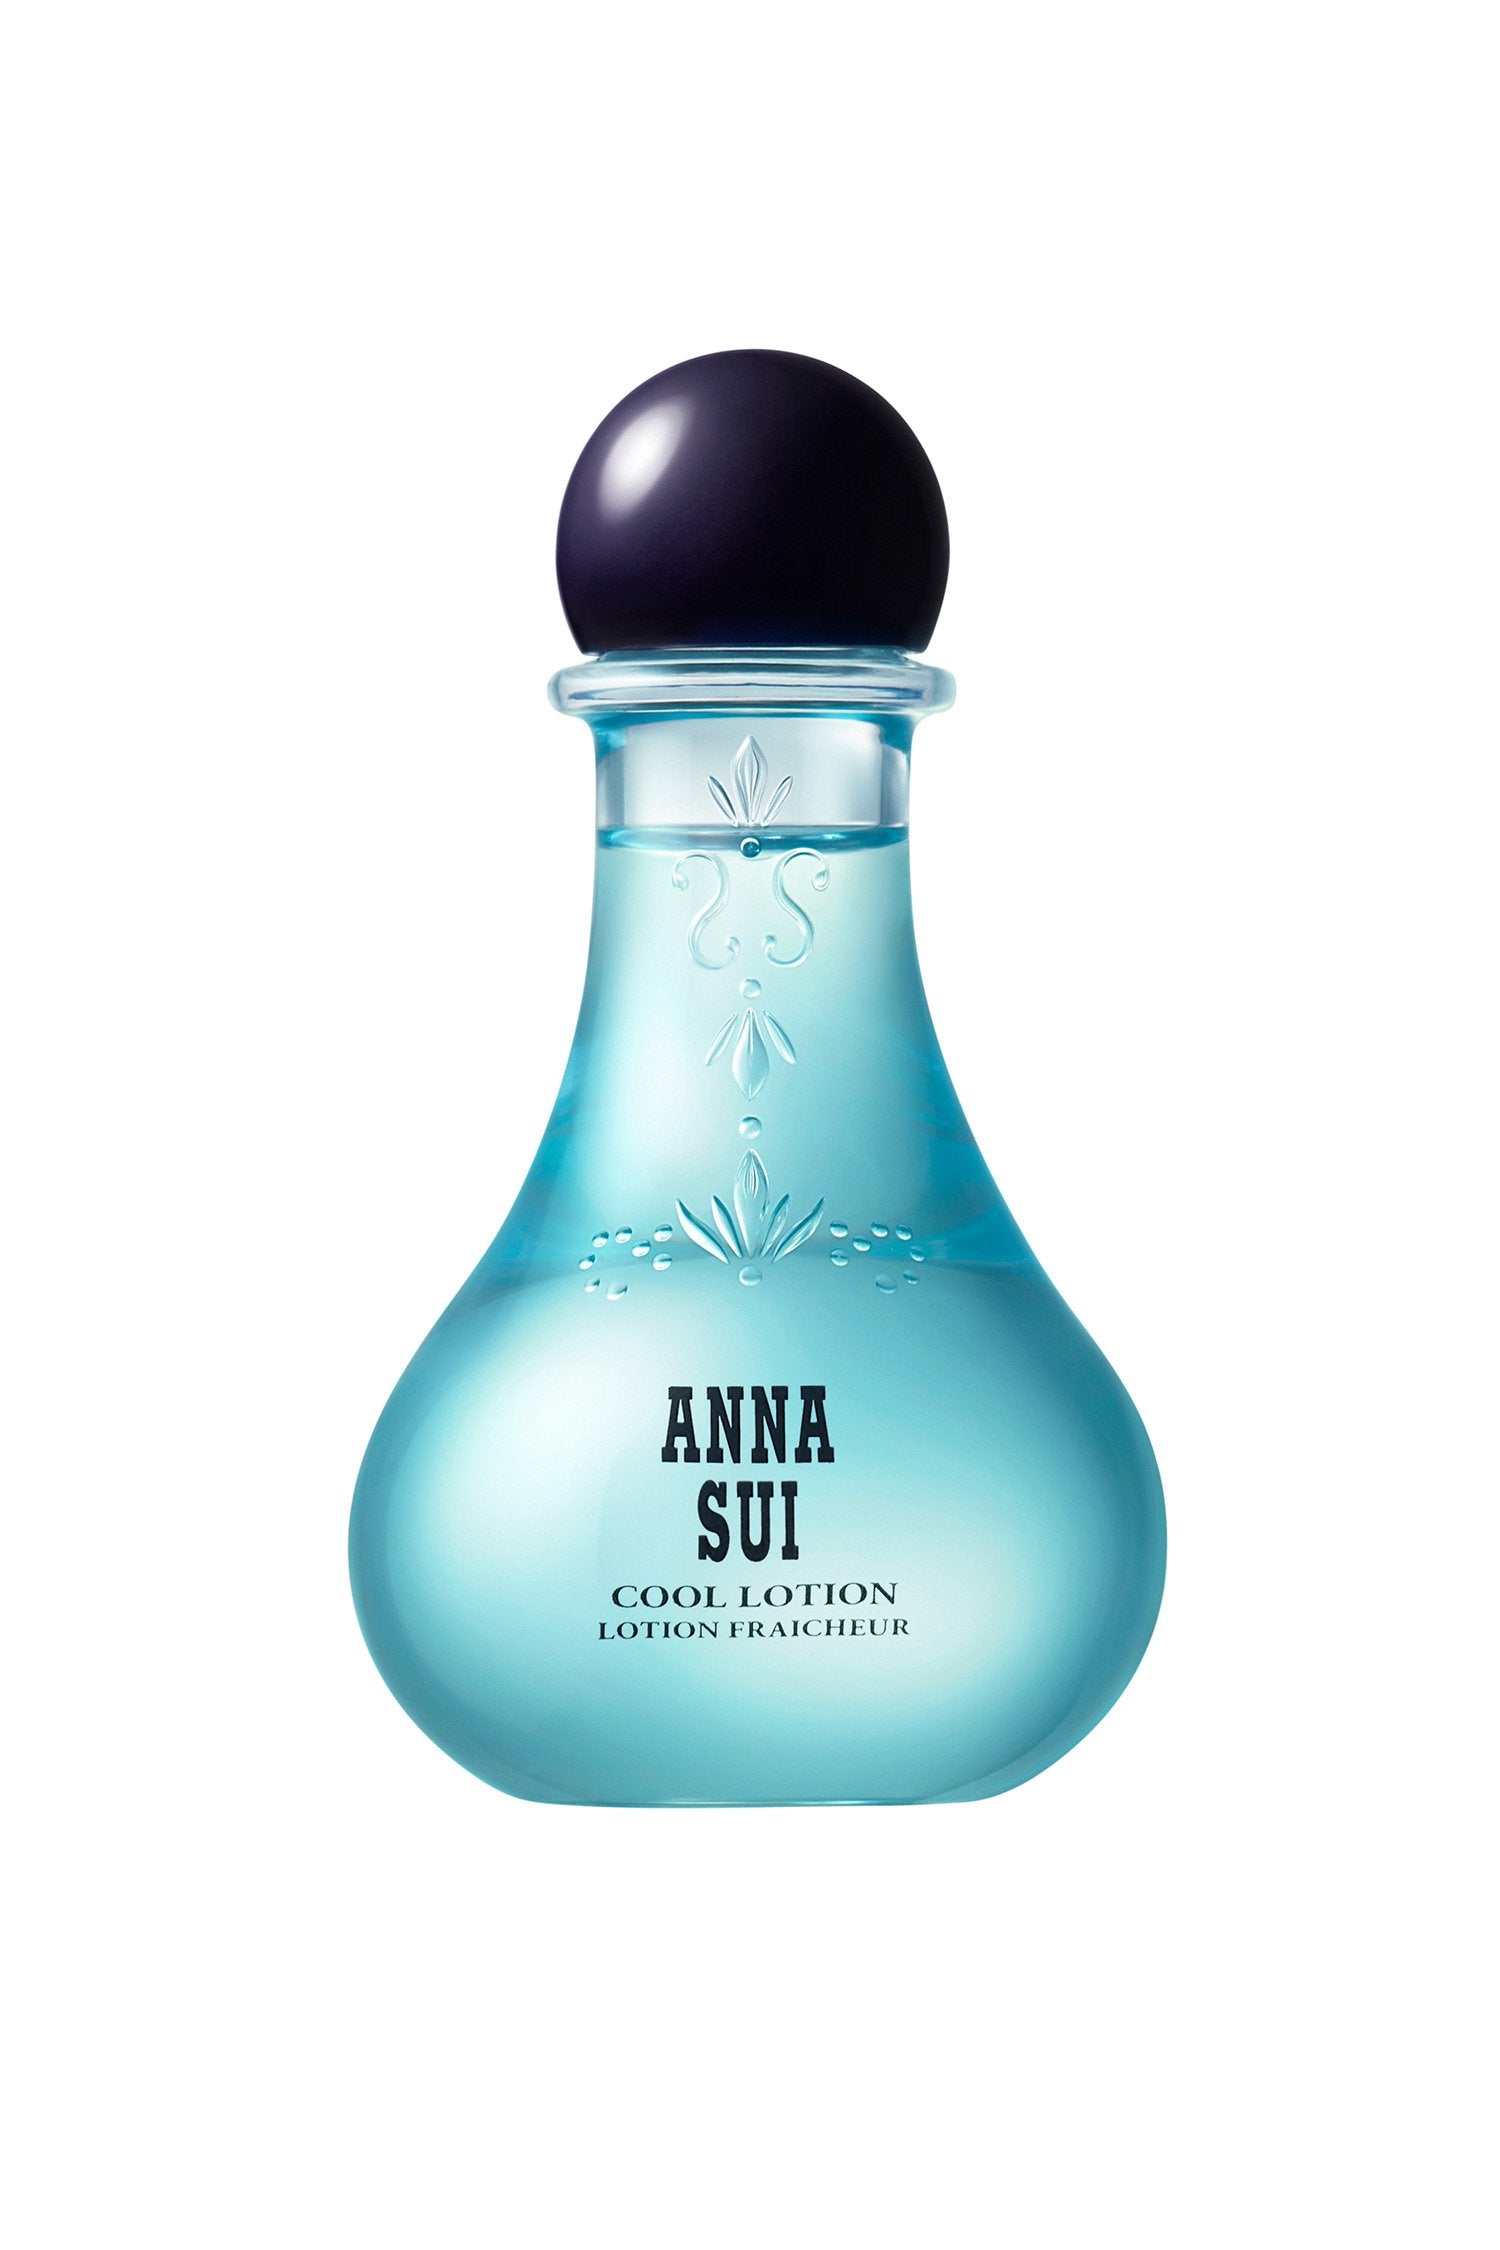 Cool Lotion is in a transparent bluish, bulb-shaped container, floral design and Anna branding, a round cap on top